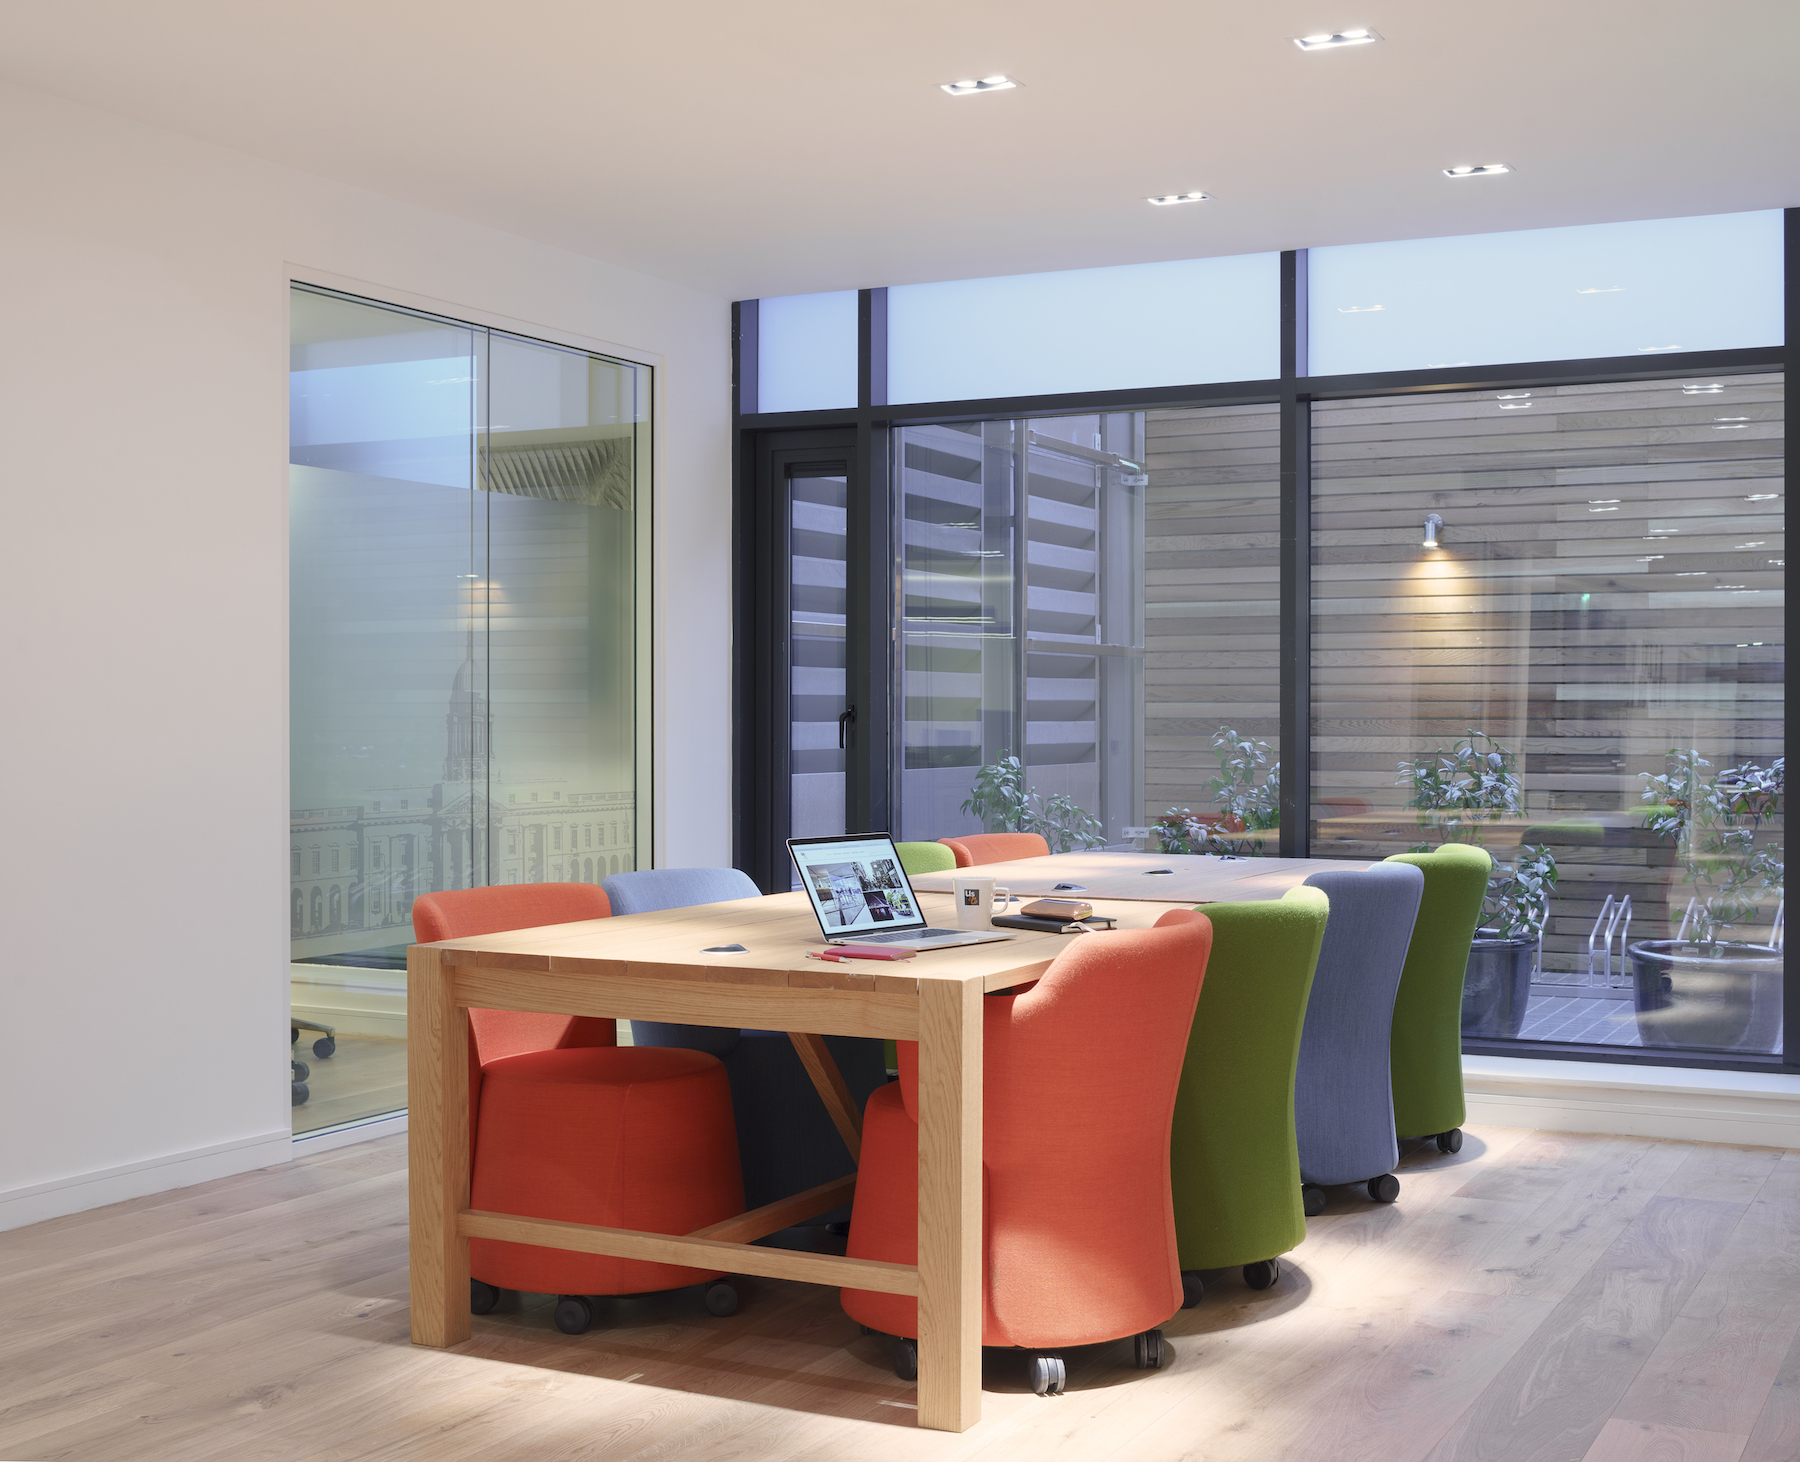 Hot desk rental in Dublin, featuring flexible shared office space with long wooden table and colourful chairs